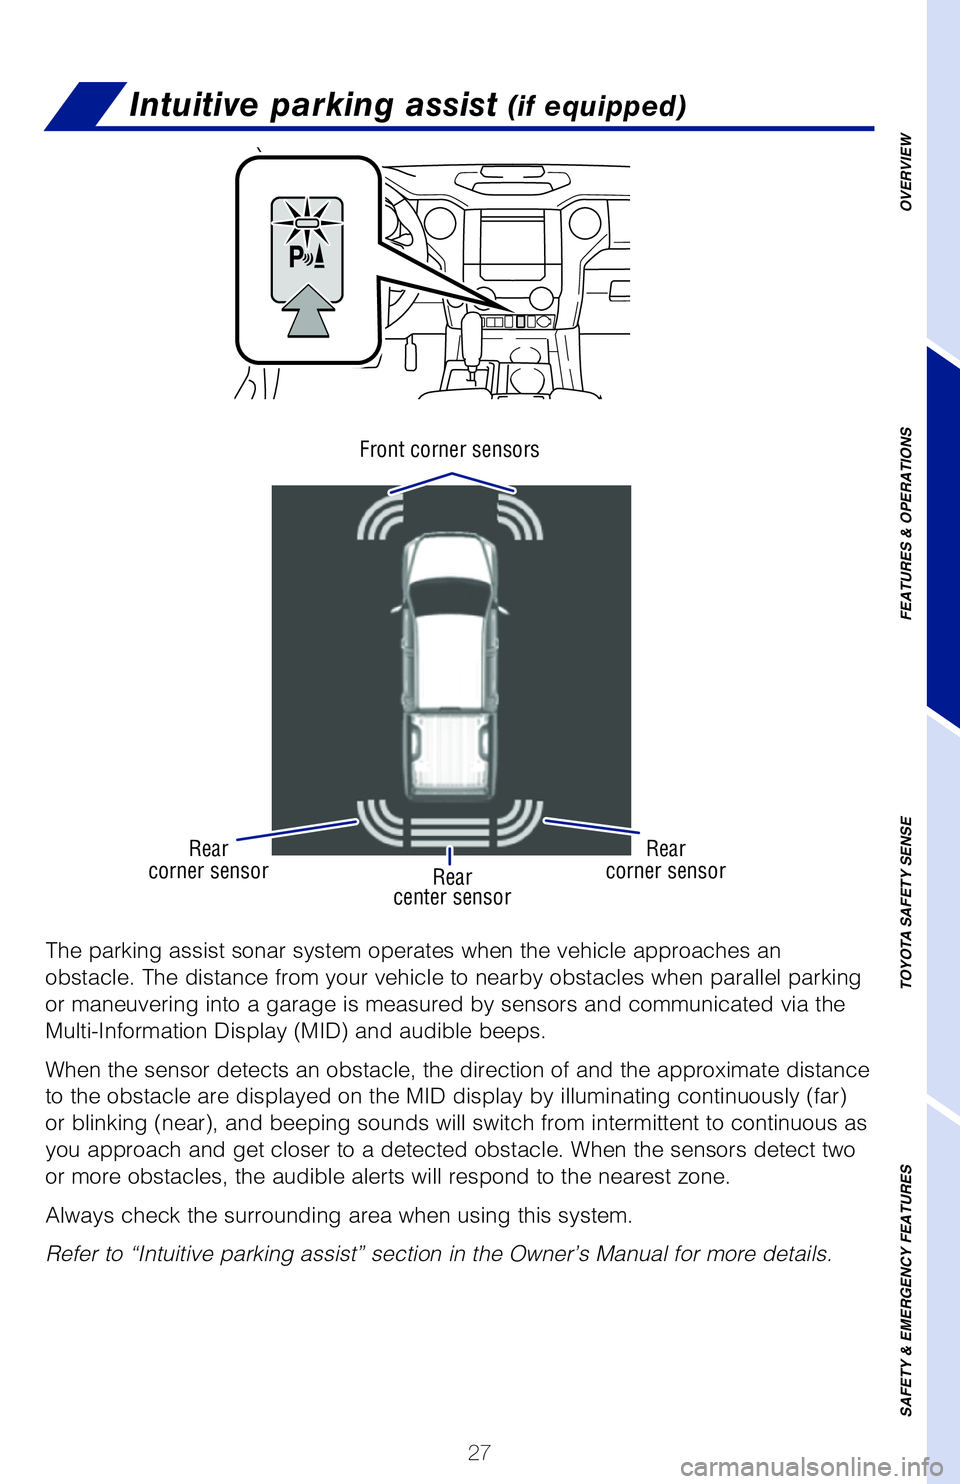 TOYOTA TUNDRA 2020  Owners Manual (in English) 27
Intuitive parking assist (if equipped)
The parking assist sonar system operates when the vehicle approaches an  
obstacle. The distance from your vehicle to nearby obstacles when parallel parking 
